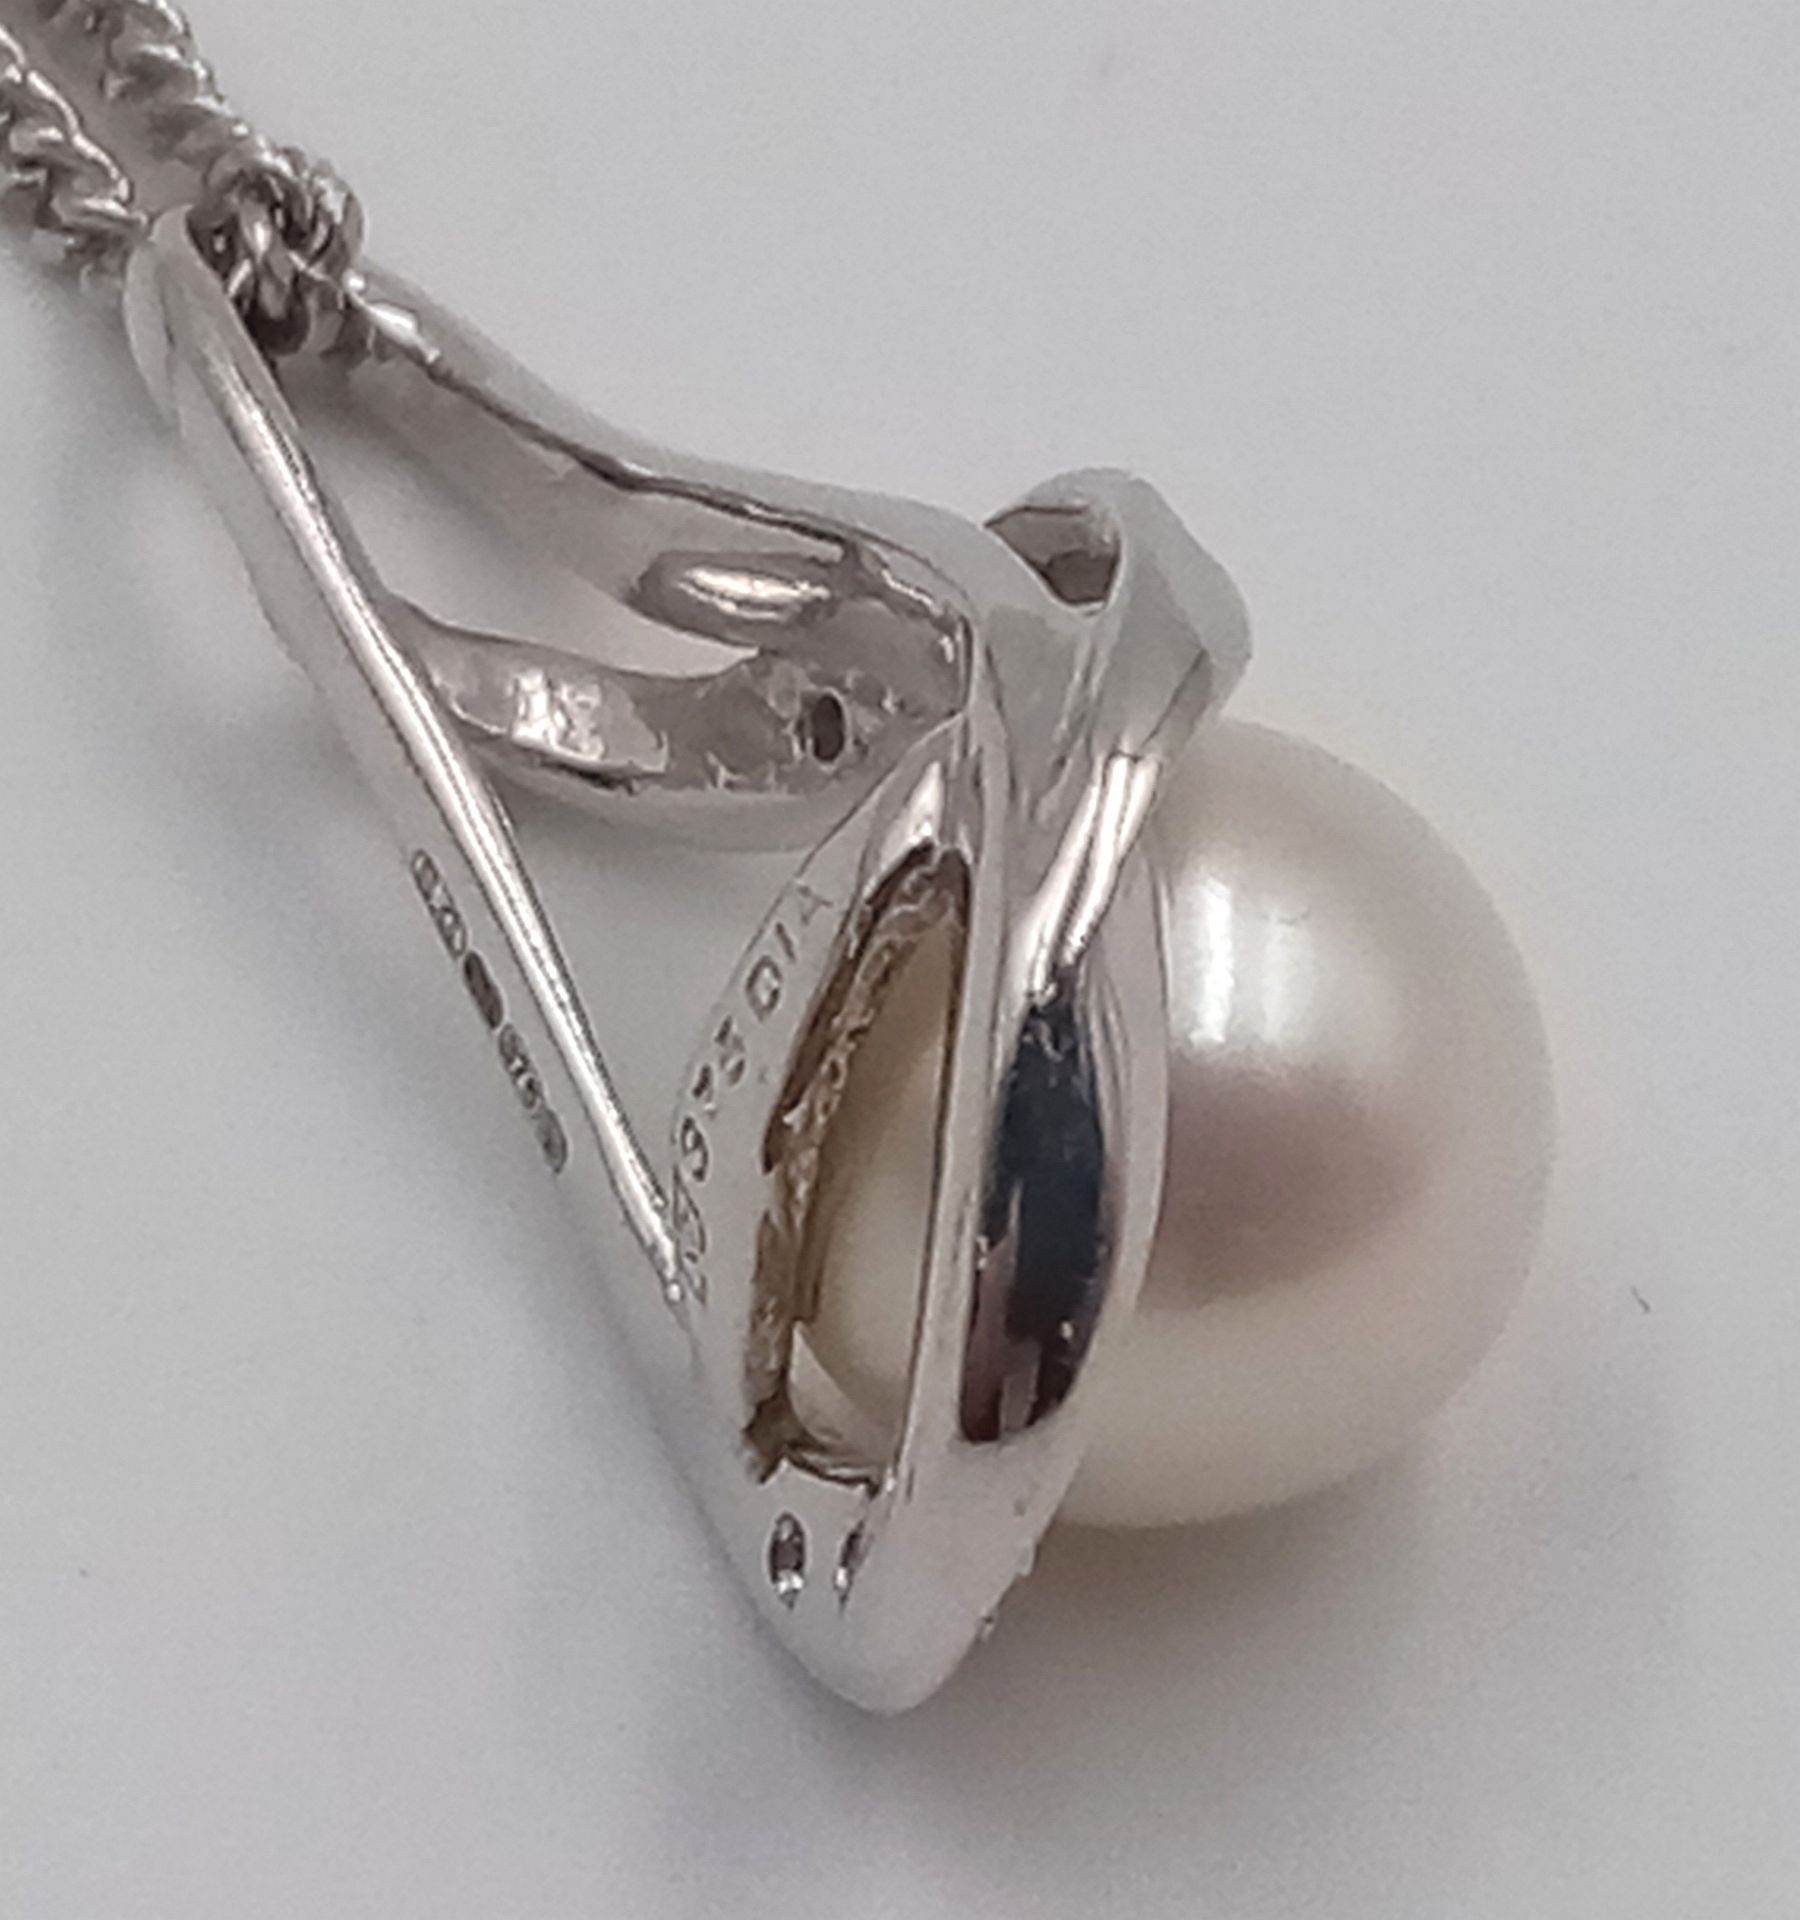 A 9ct White Gold Diamond and Pearl Necklace, 6mm pearl size, 0.05ct diamond, 20” chain length, 4. - Image 2 of 4